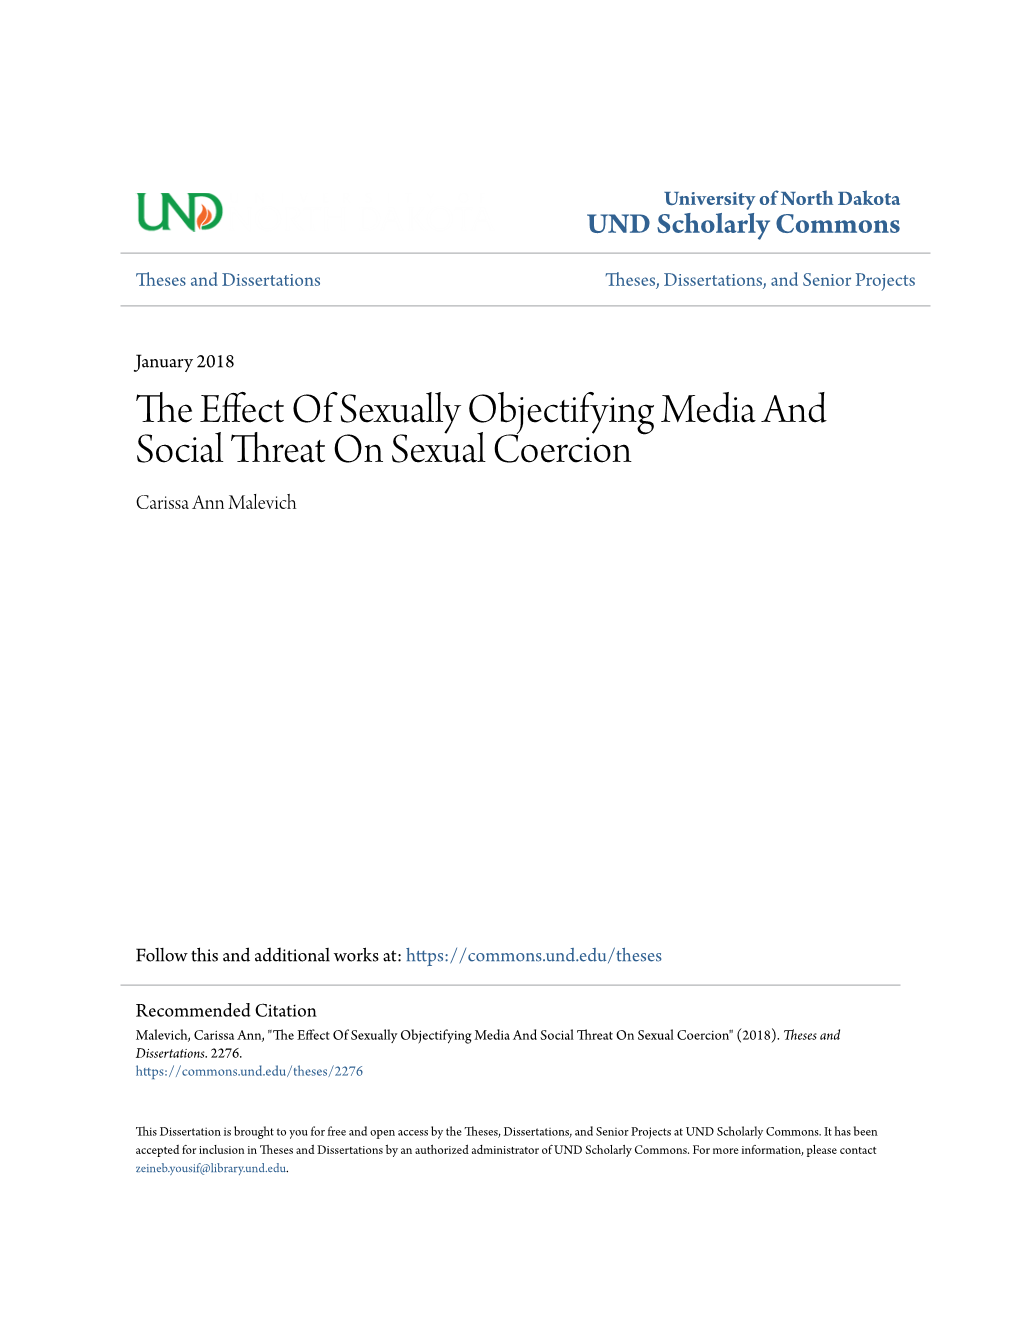 The Effect of Sexually Objectifying Media and Social Threat on Sexual Coercion" (2018)